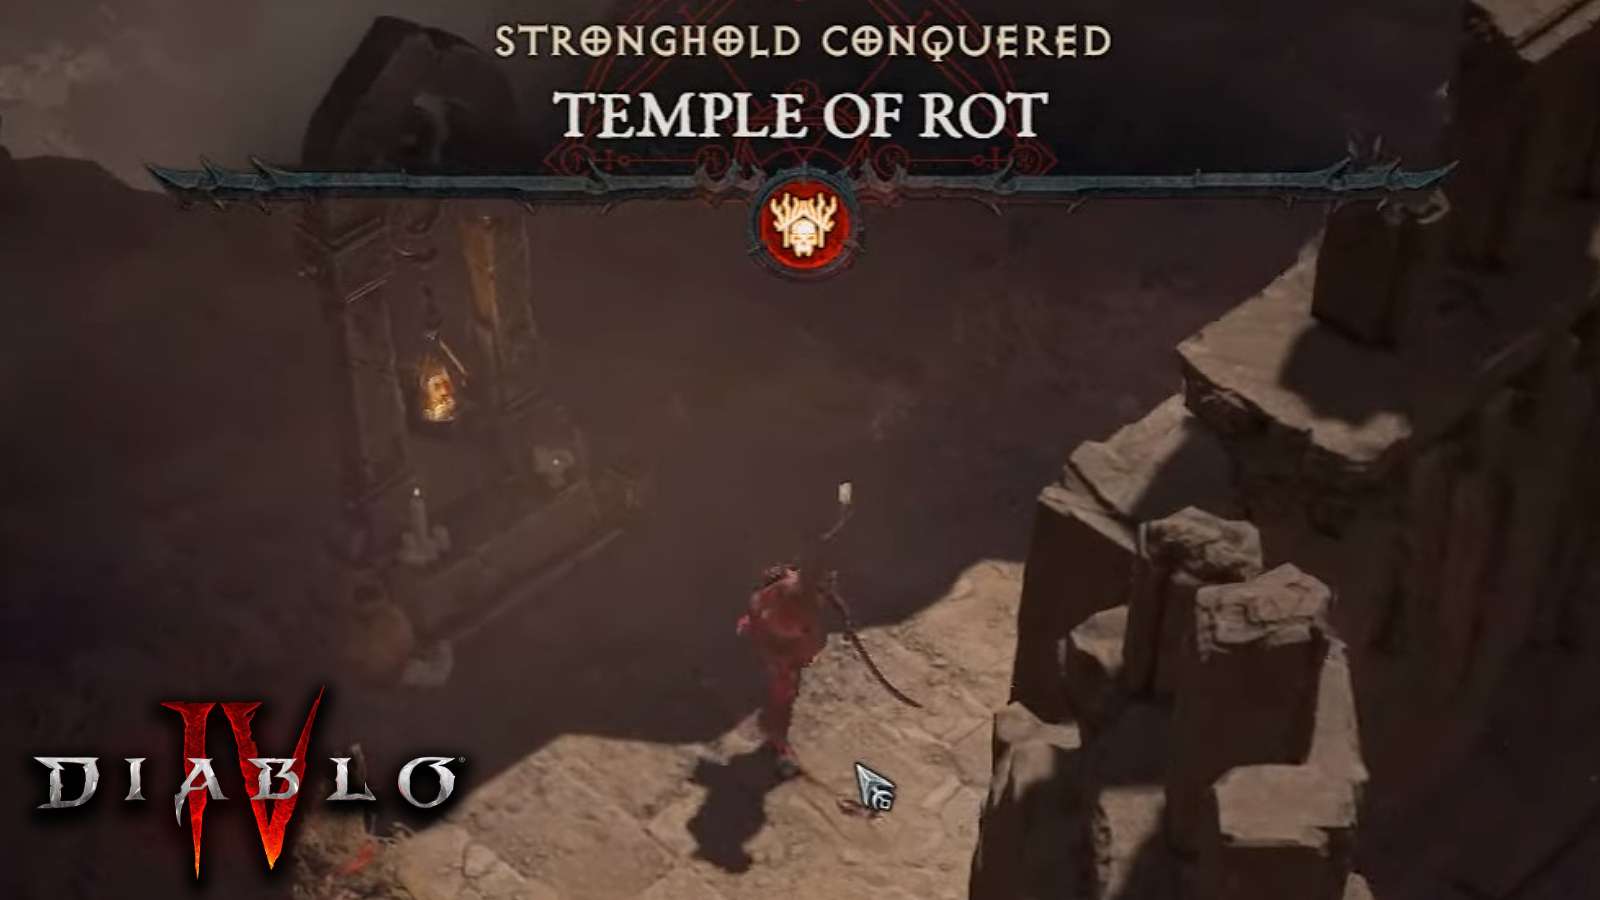 an image of the Temple of Rot Stronghold in Diablo 4